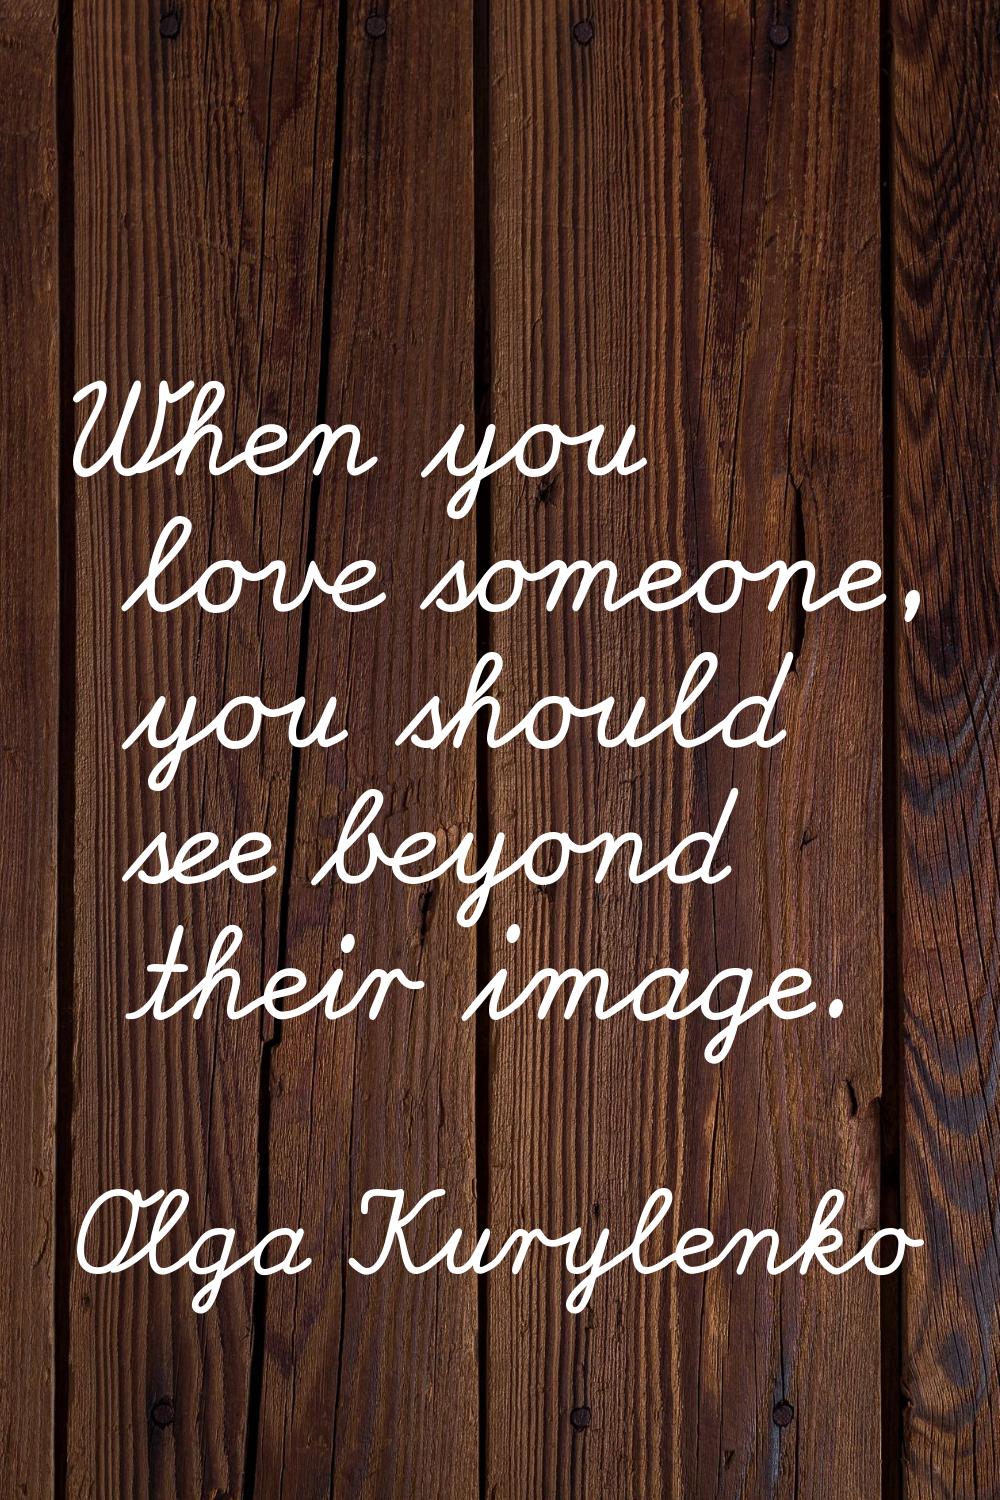 When you love someone, you should see beyond their image.